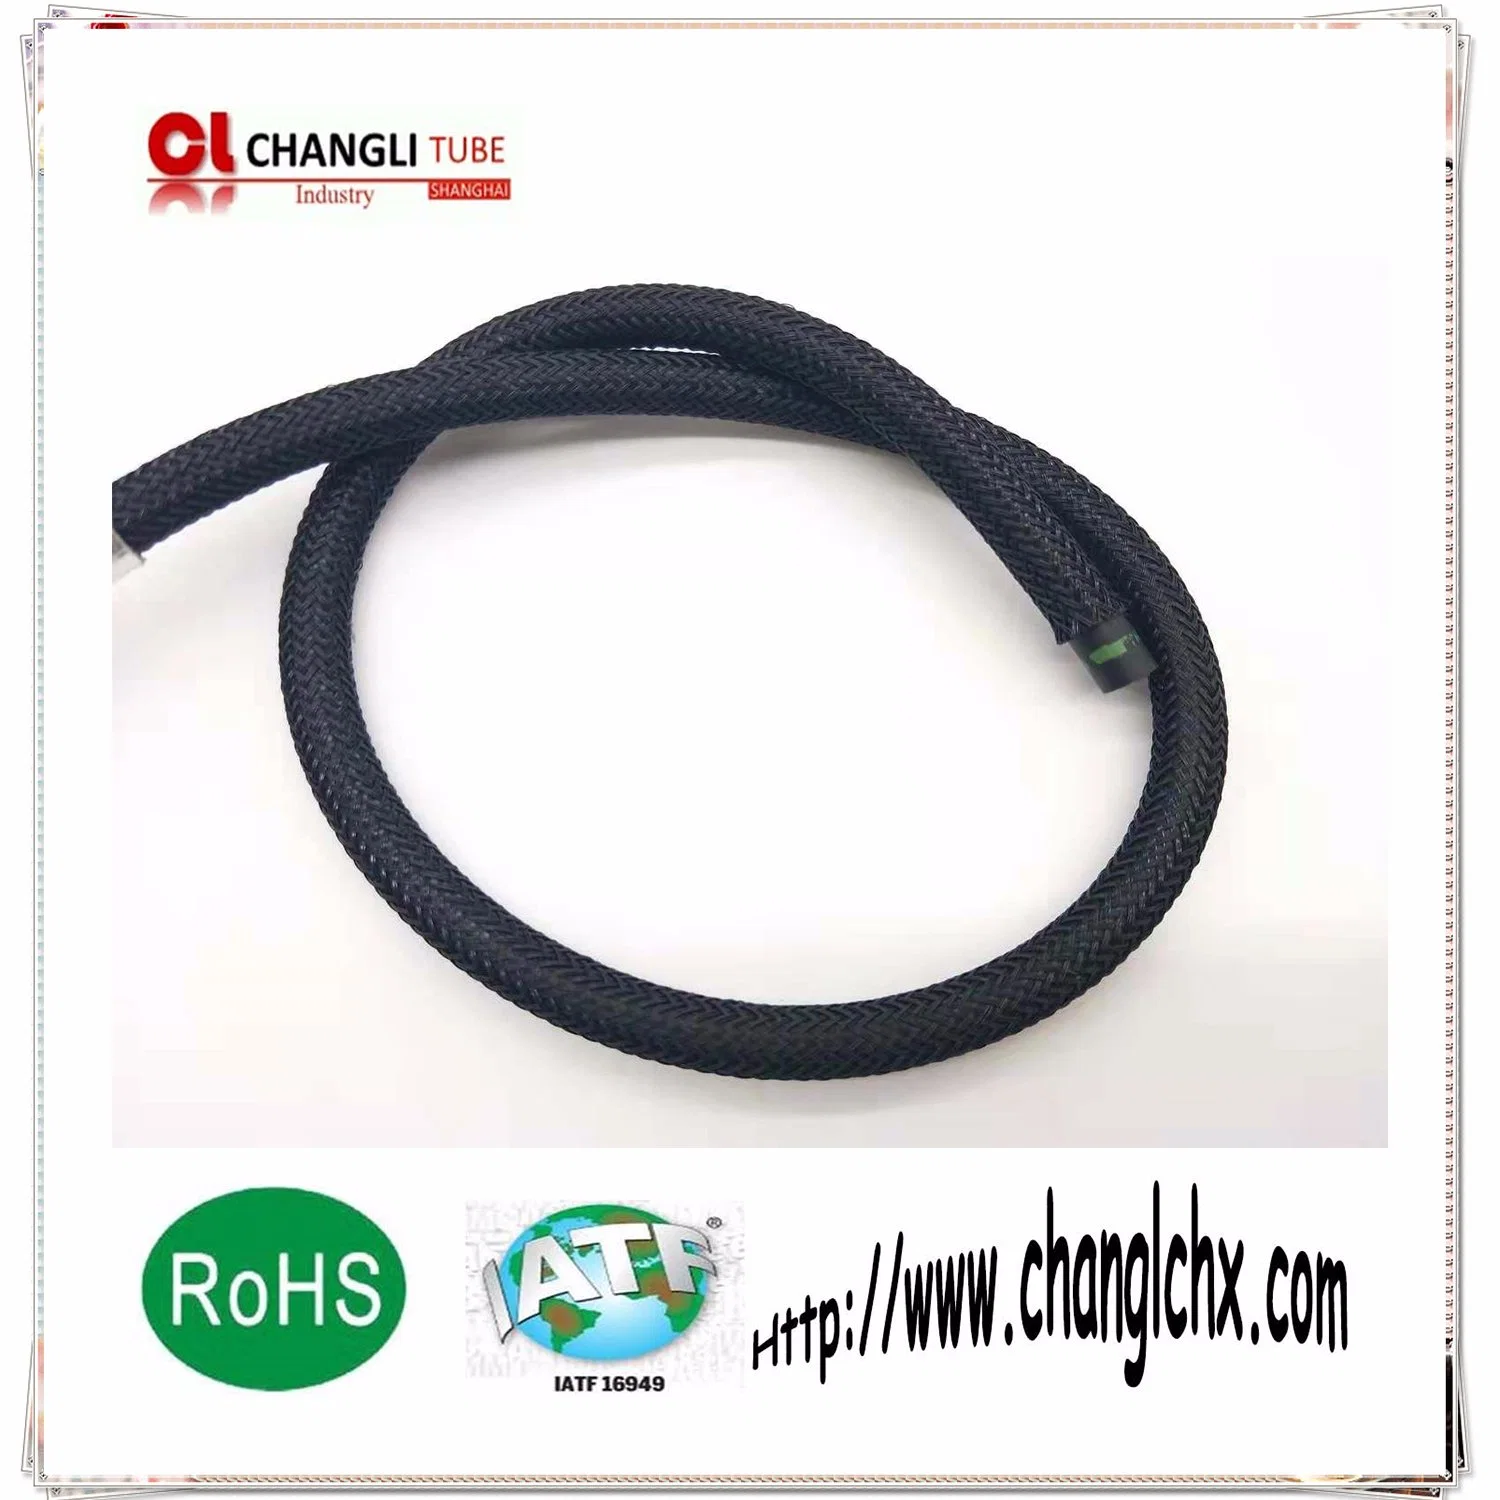 Pet Expandable Braided Cable Protective Sleeve